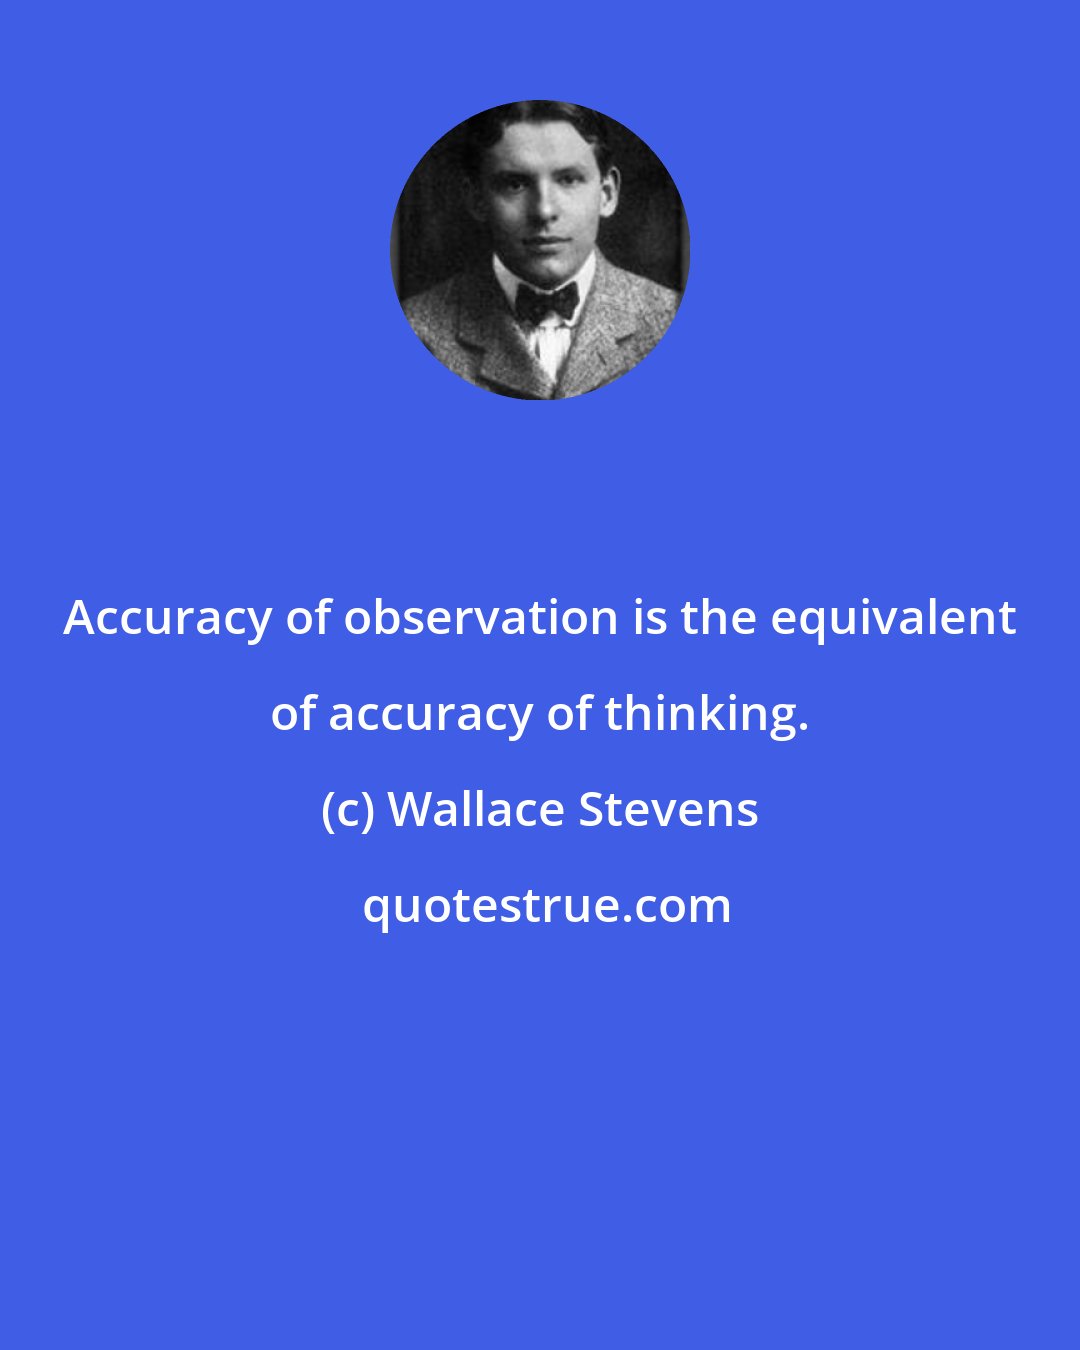 Wallace Stevens: Accuracy of observation is the equivalent of accuracy of thinking.